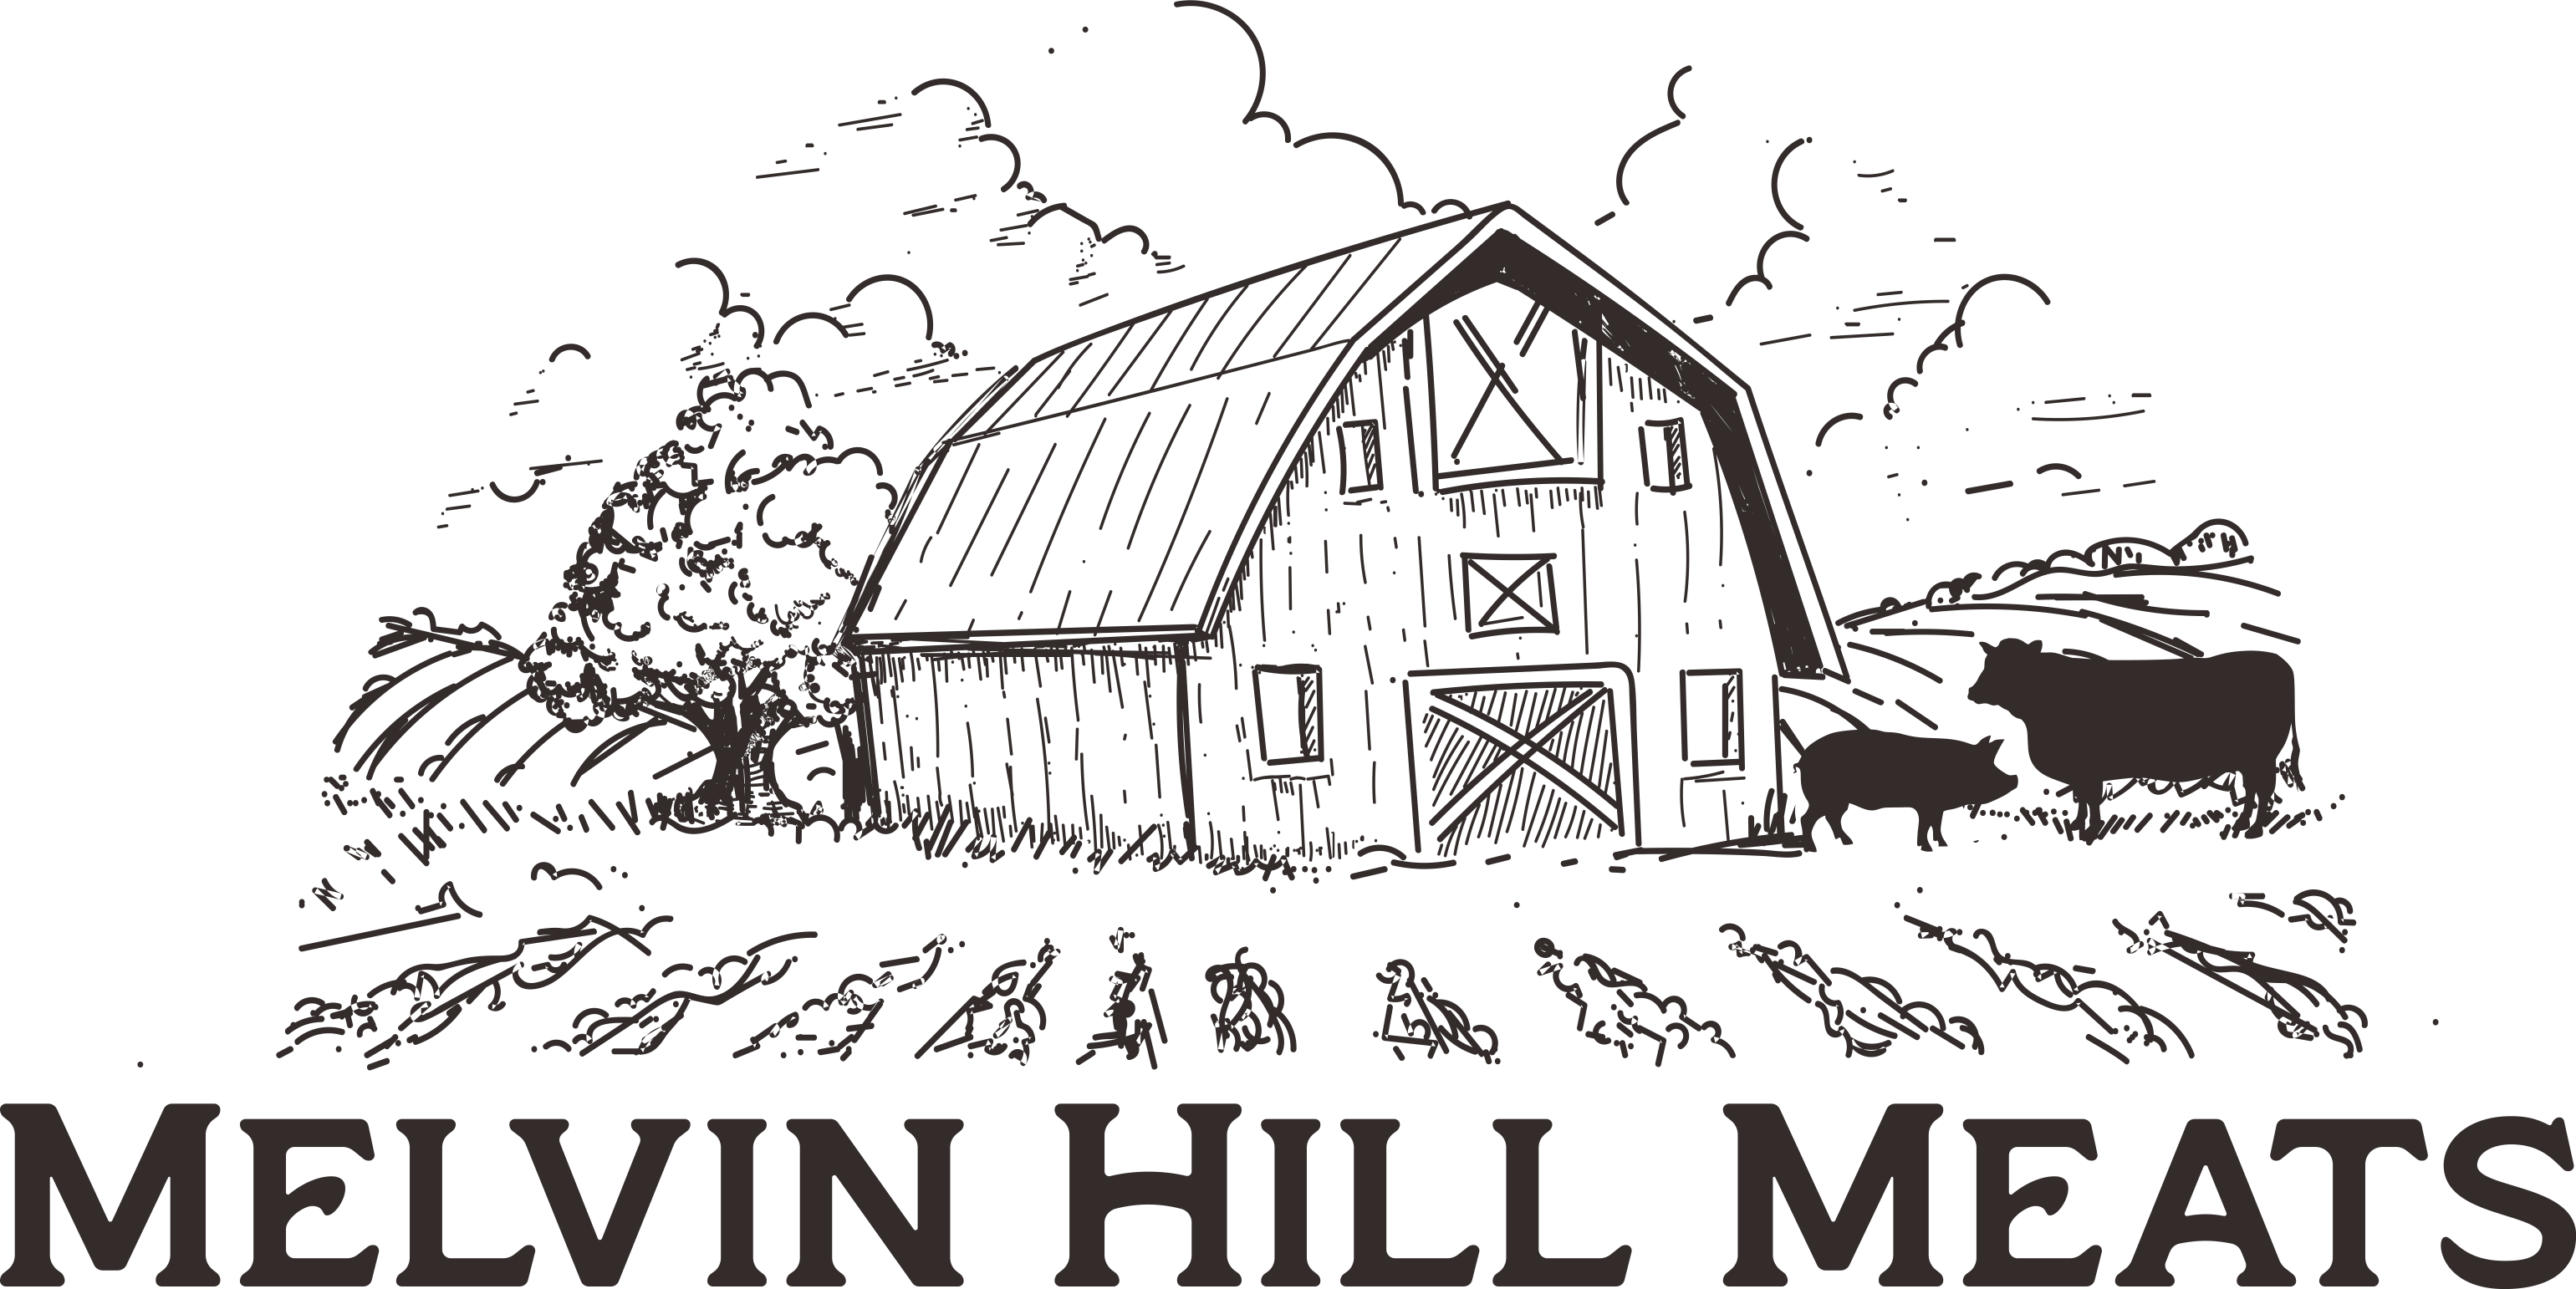 Melvin Hill Meats